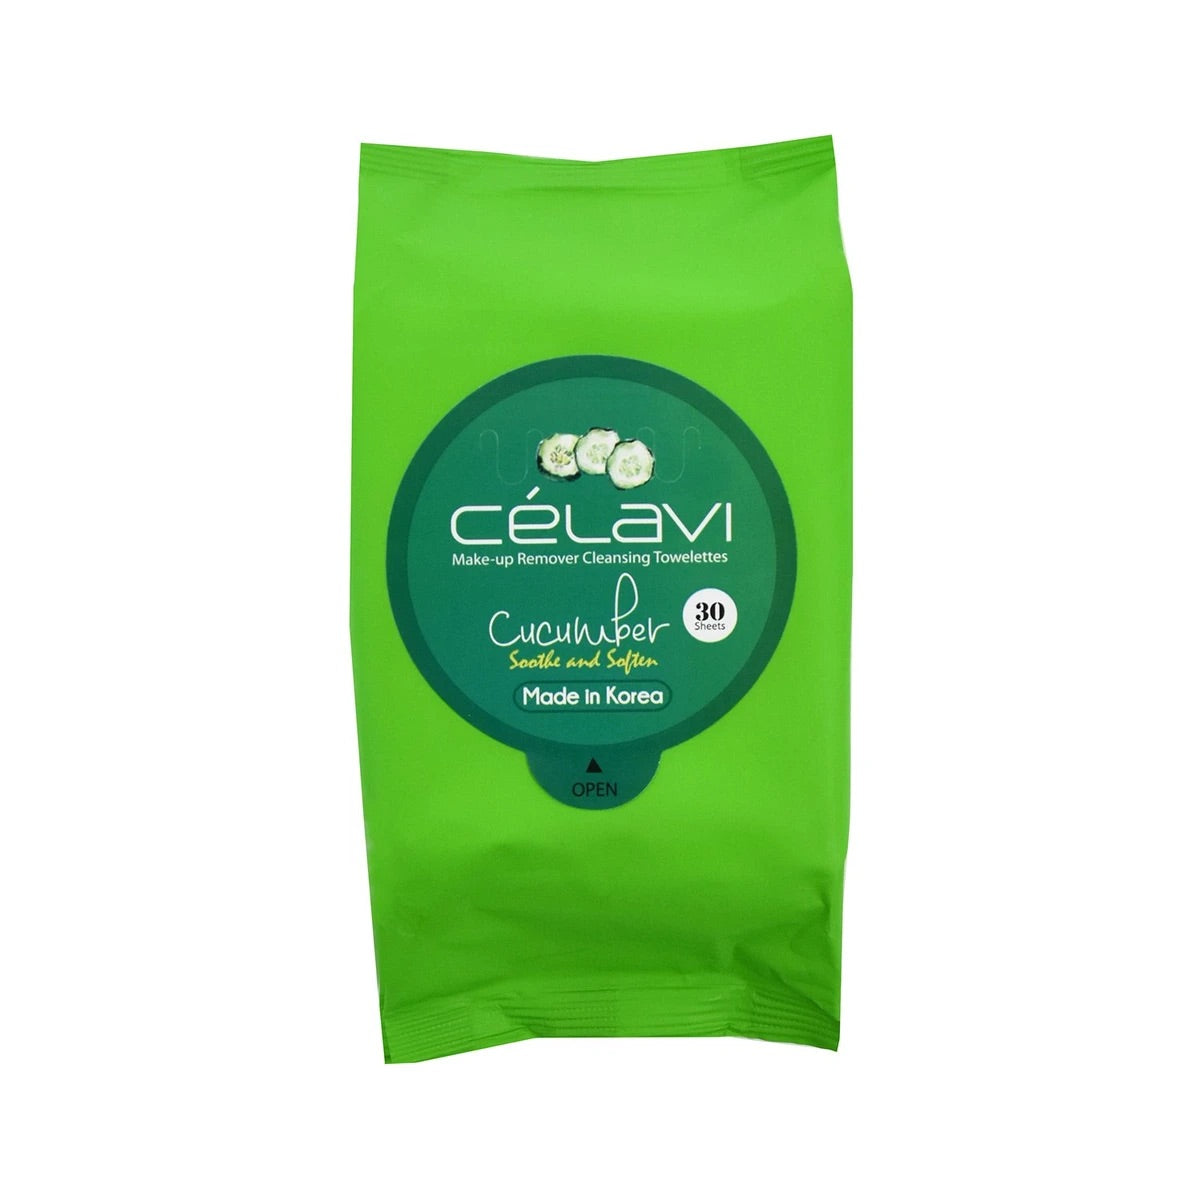 Cucumber makeup remover wipes